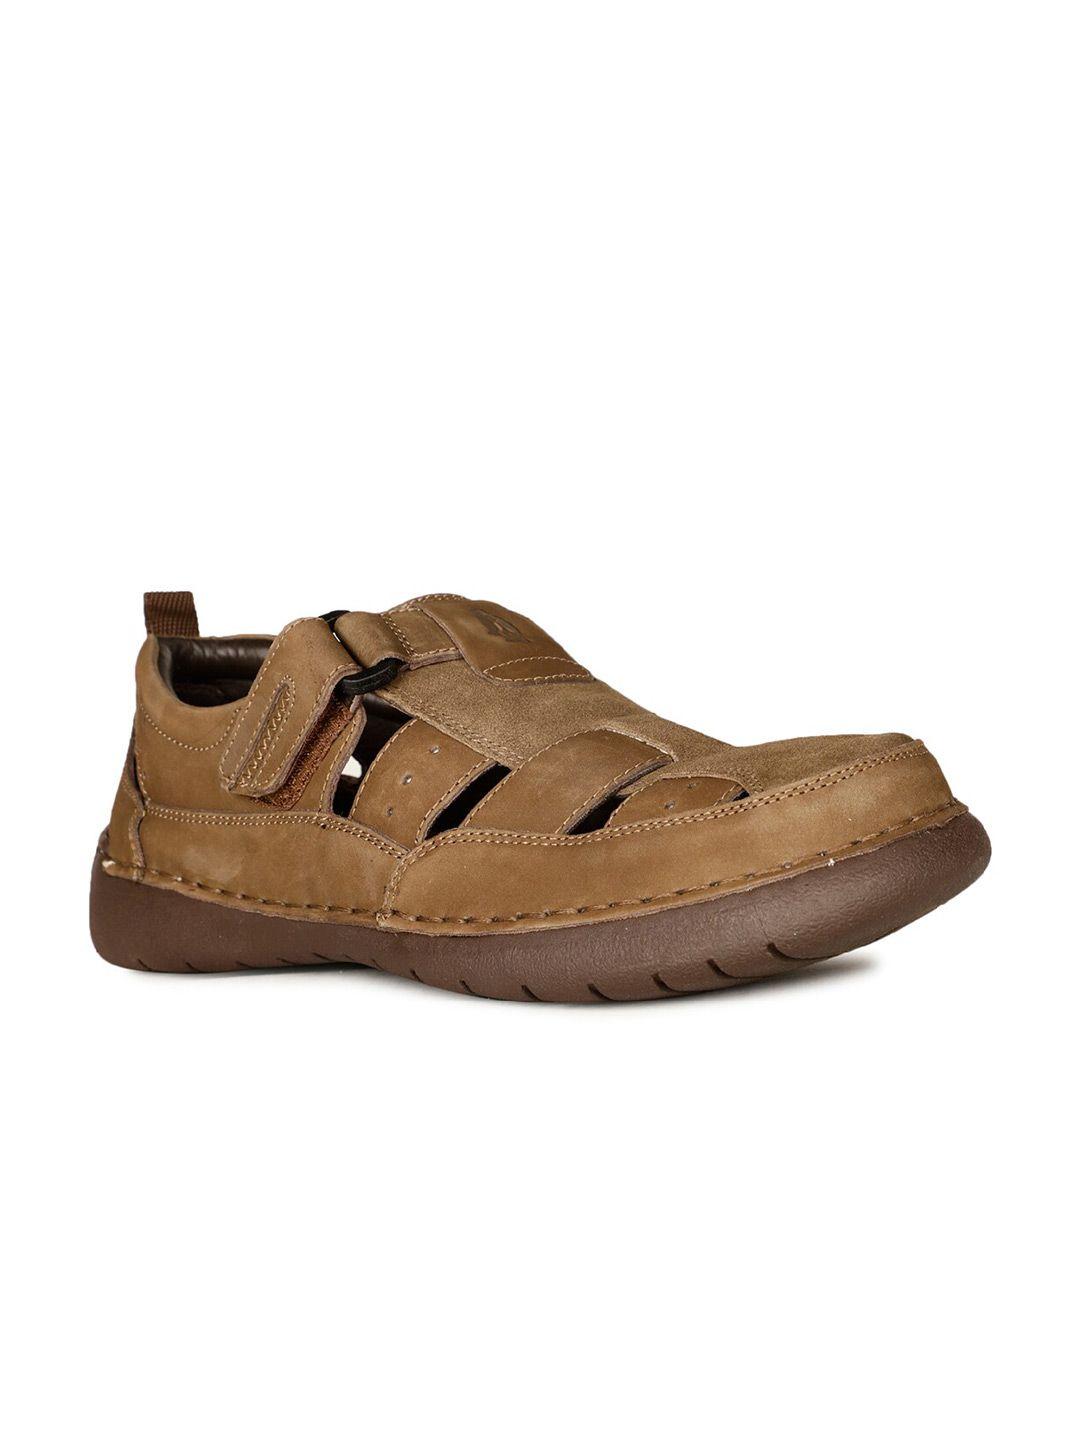 hush puppies leather velcro shoe-style sandals